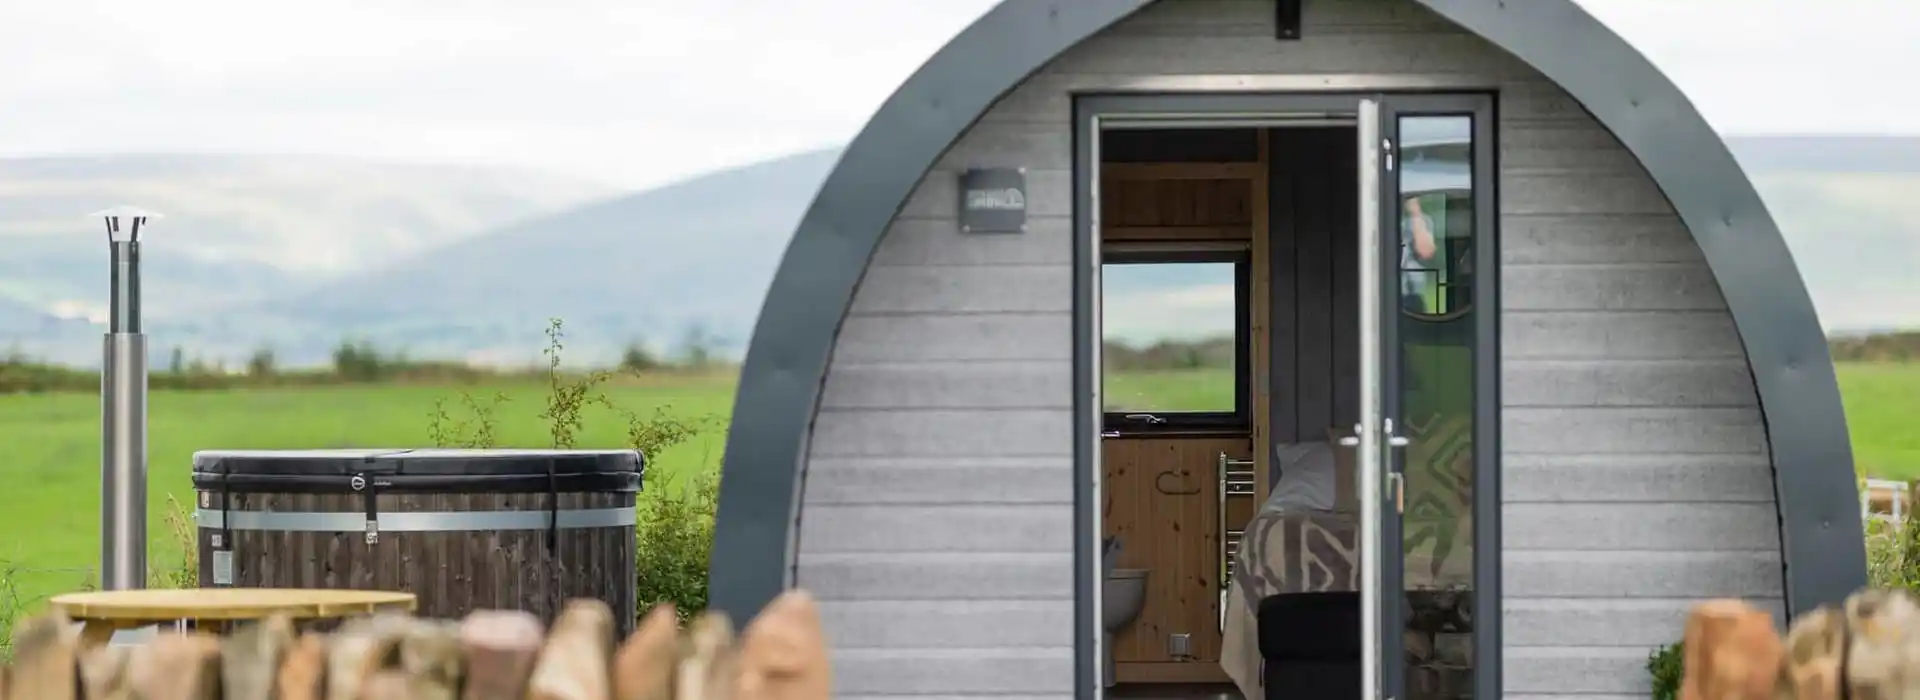 Glamping in the Yorkshire Dales